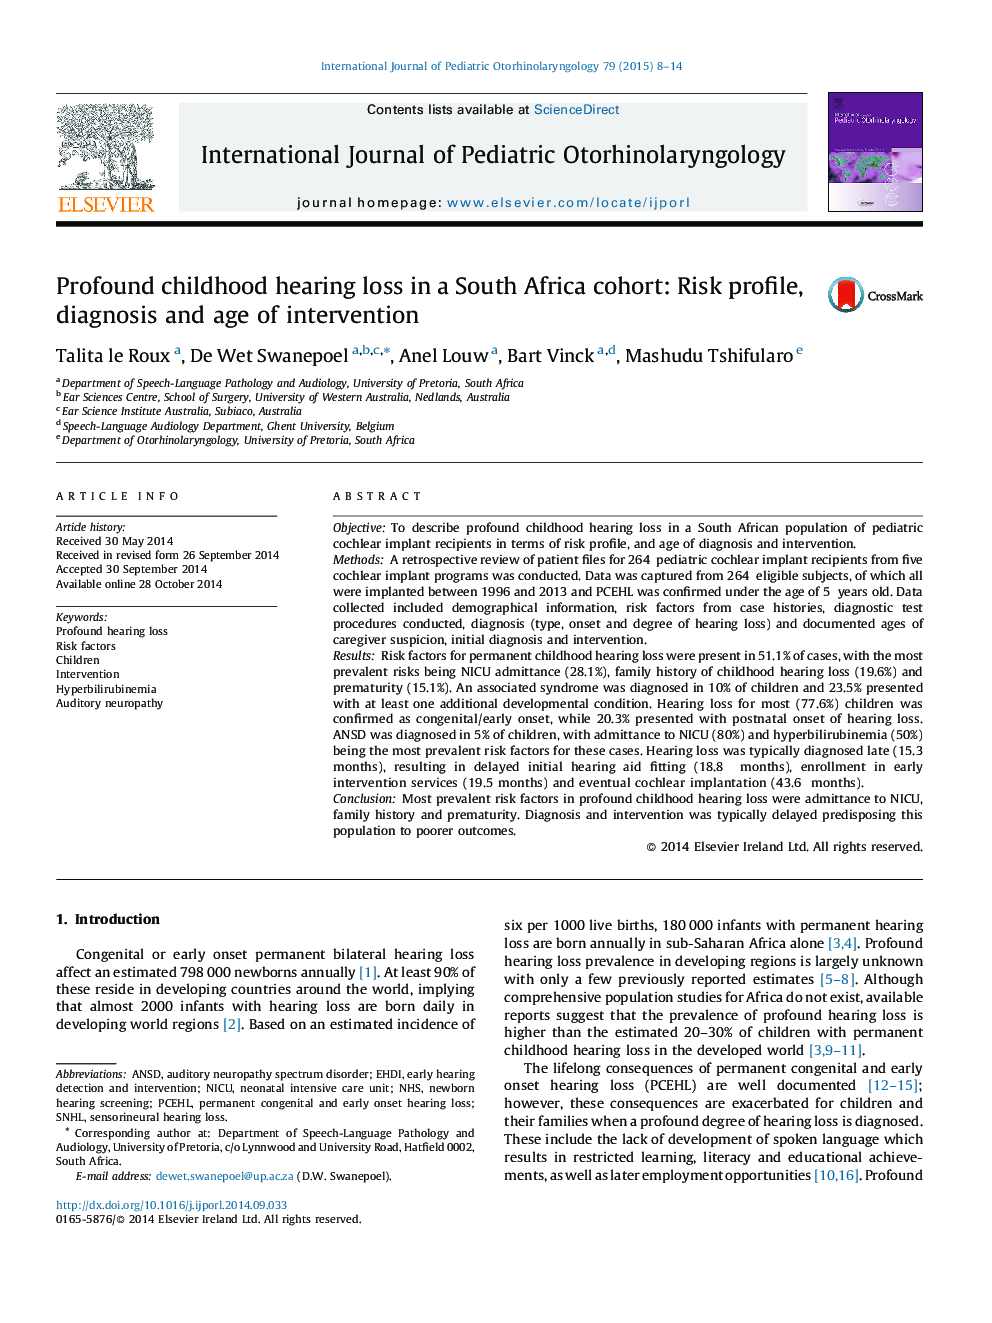 Profound childhood hearing loss in a South Africa cohort: Risk profile, diagnosis and age of intervention